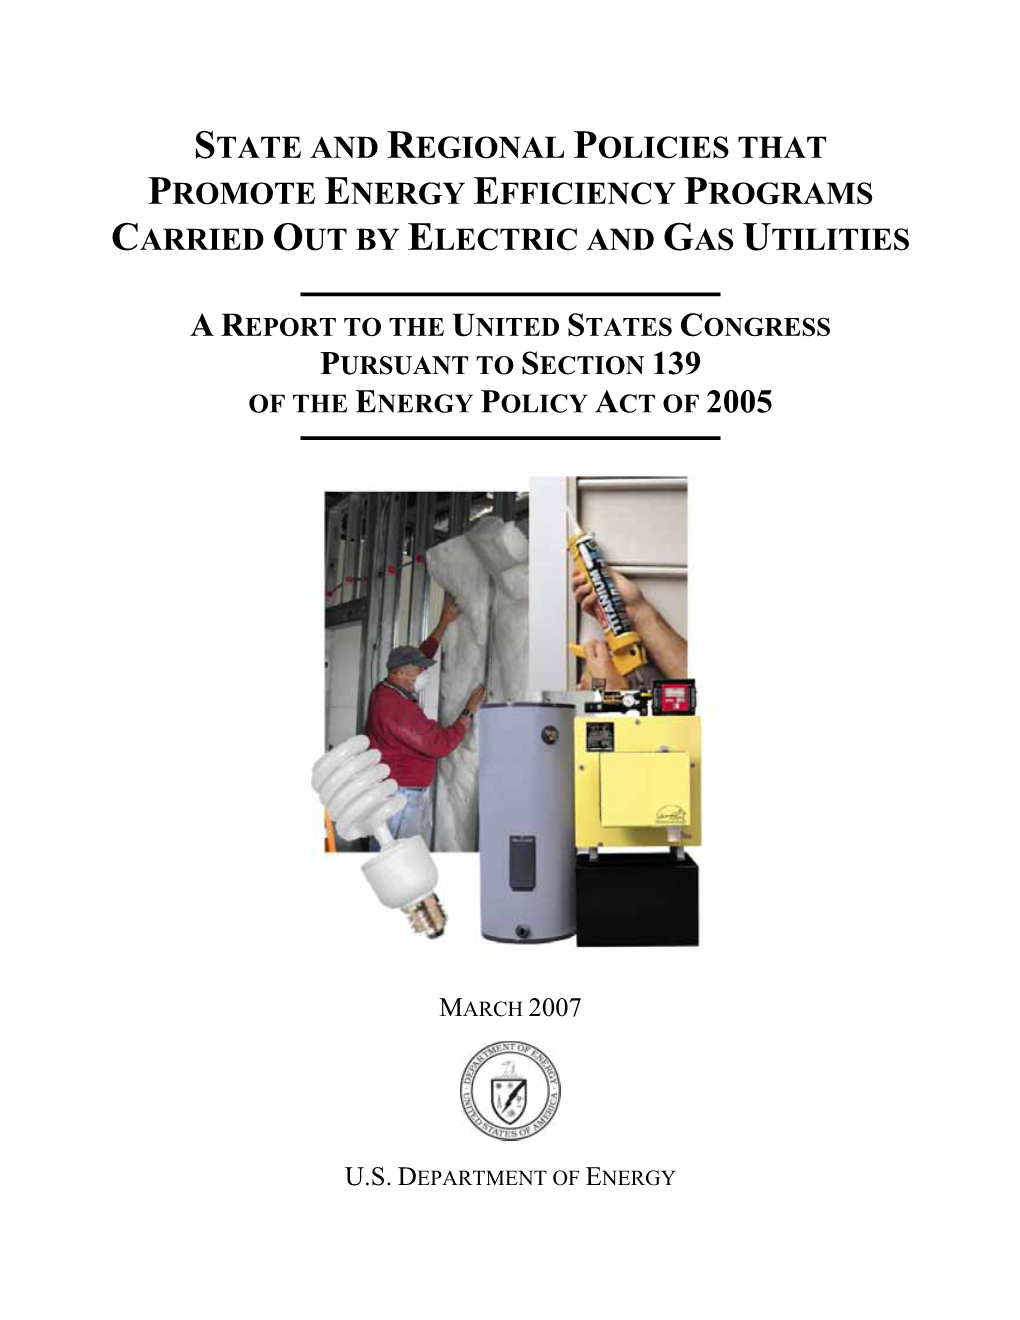 DOE Report to Congress—Energy Efficient Electric and Natural Gas Utilities